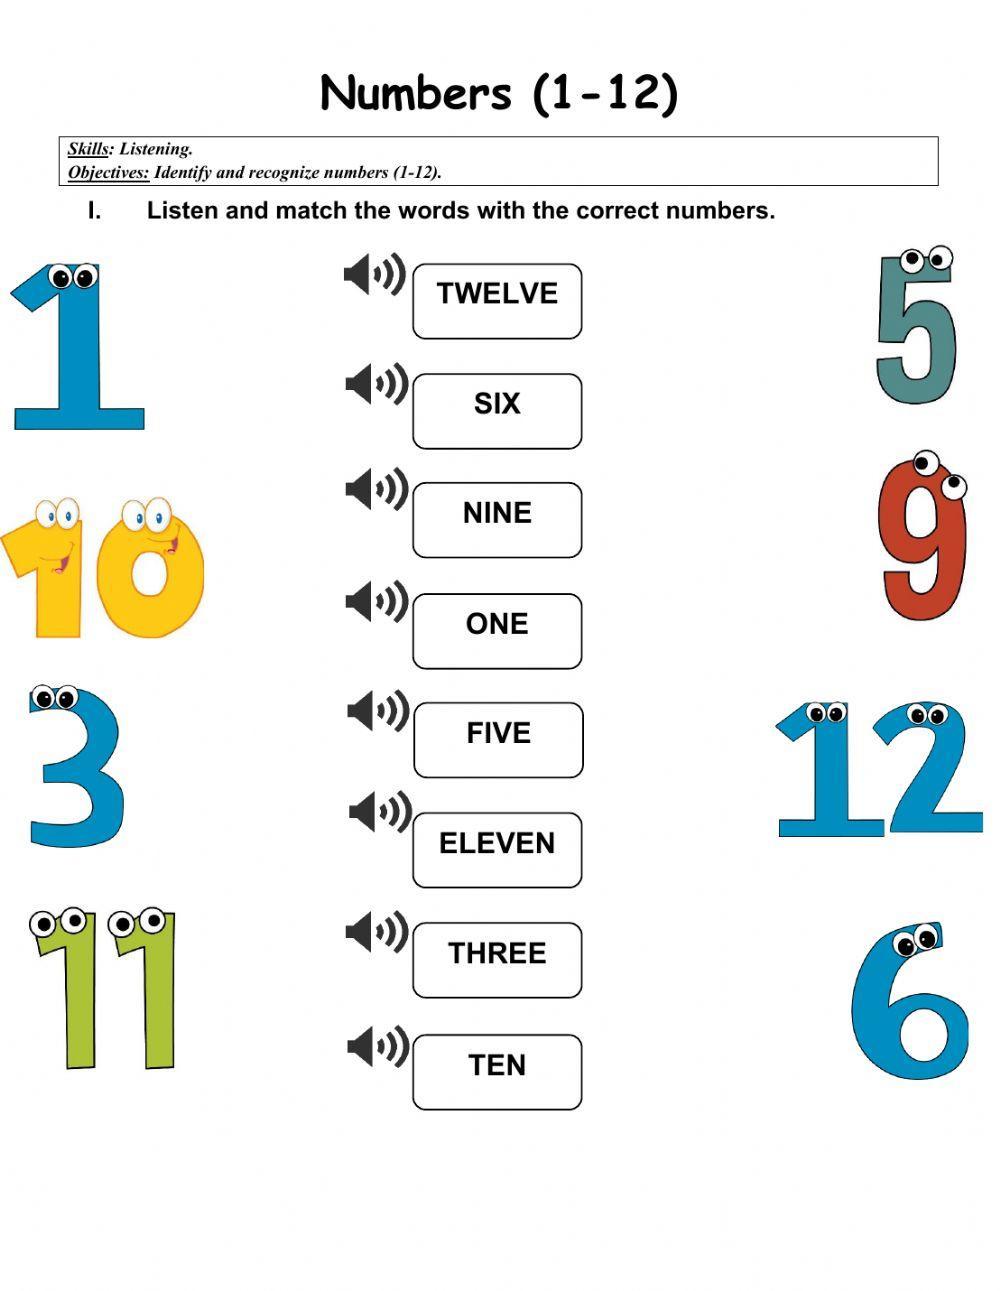 Numbers (1-12)